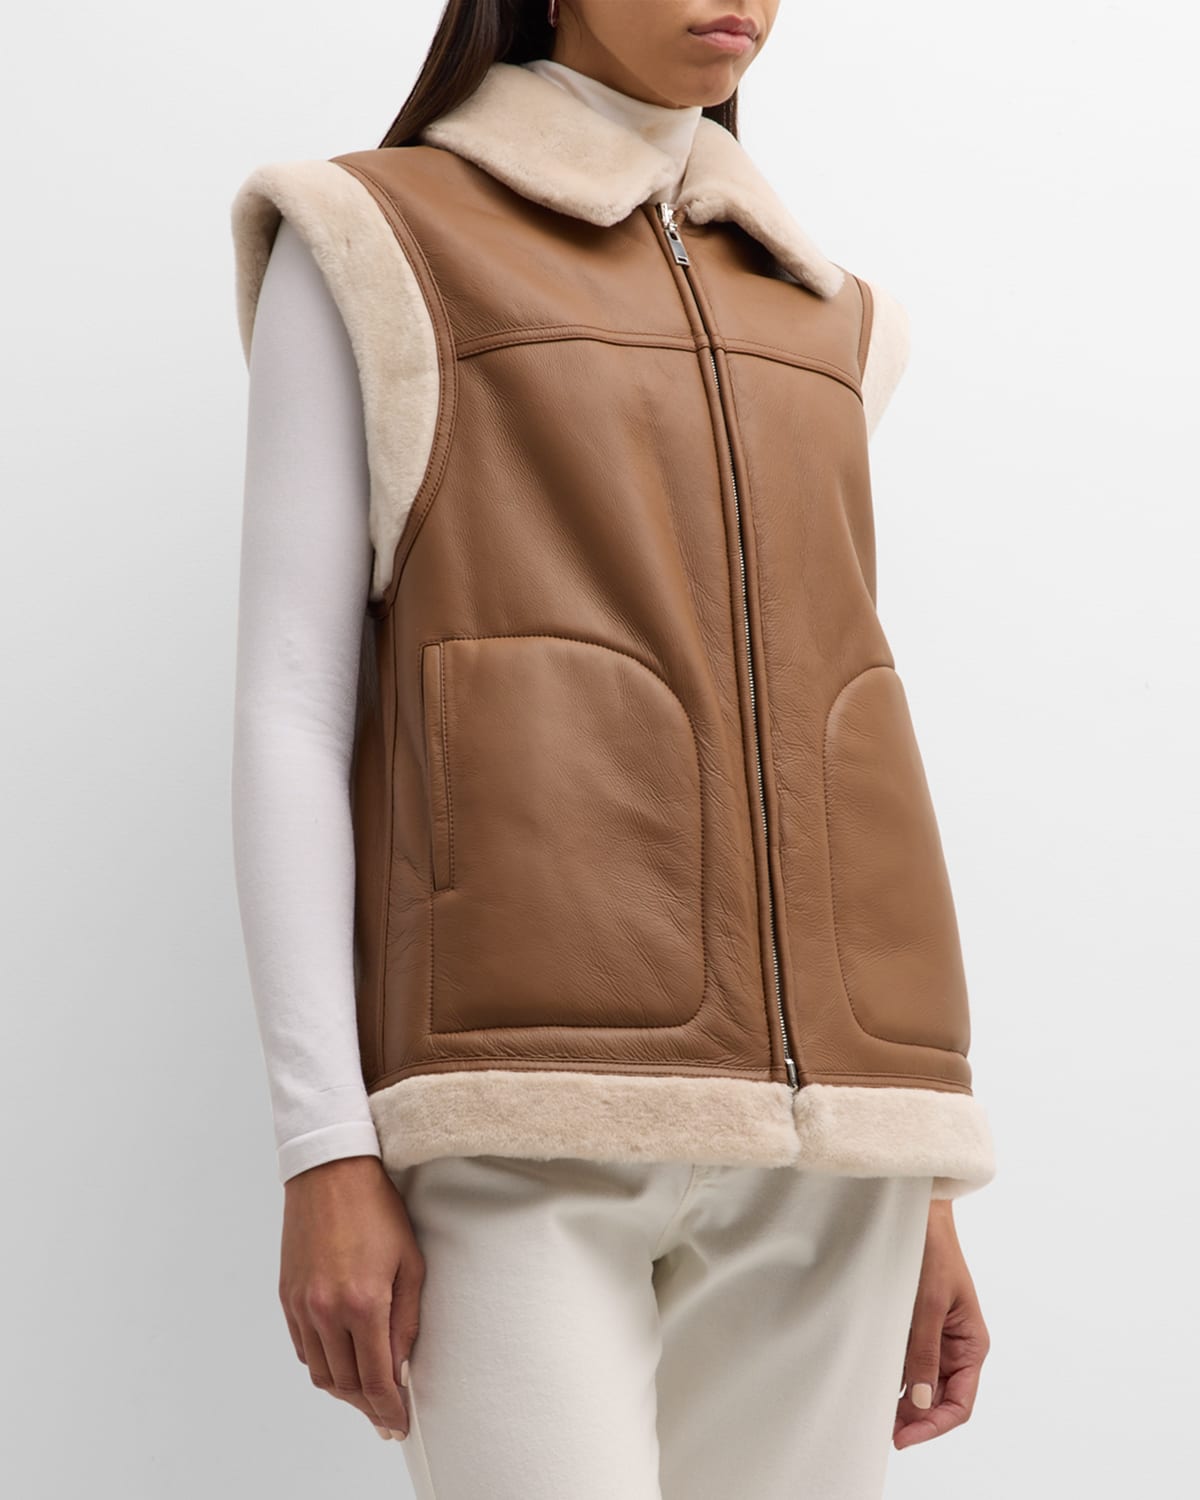 Tiffany Leather Vest with Shearling Lining